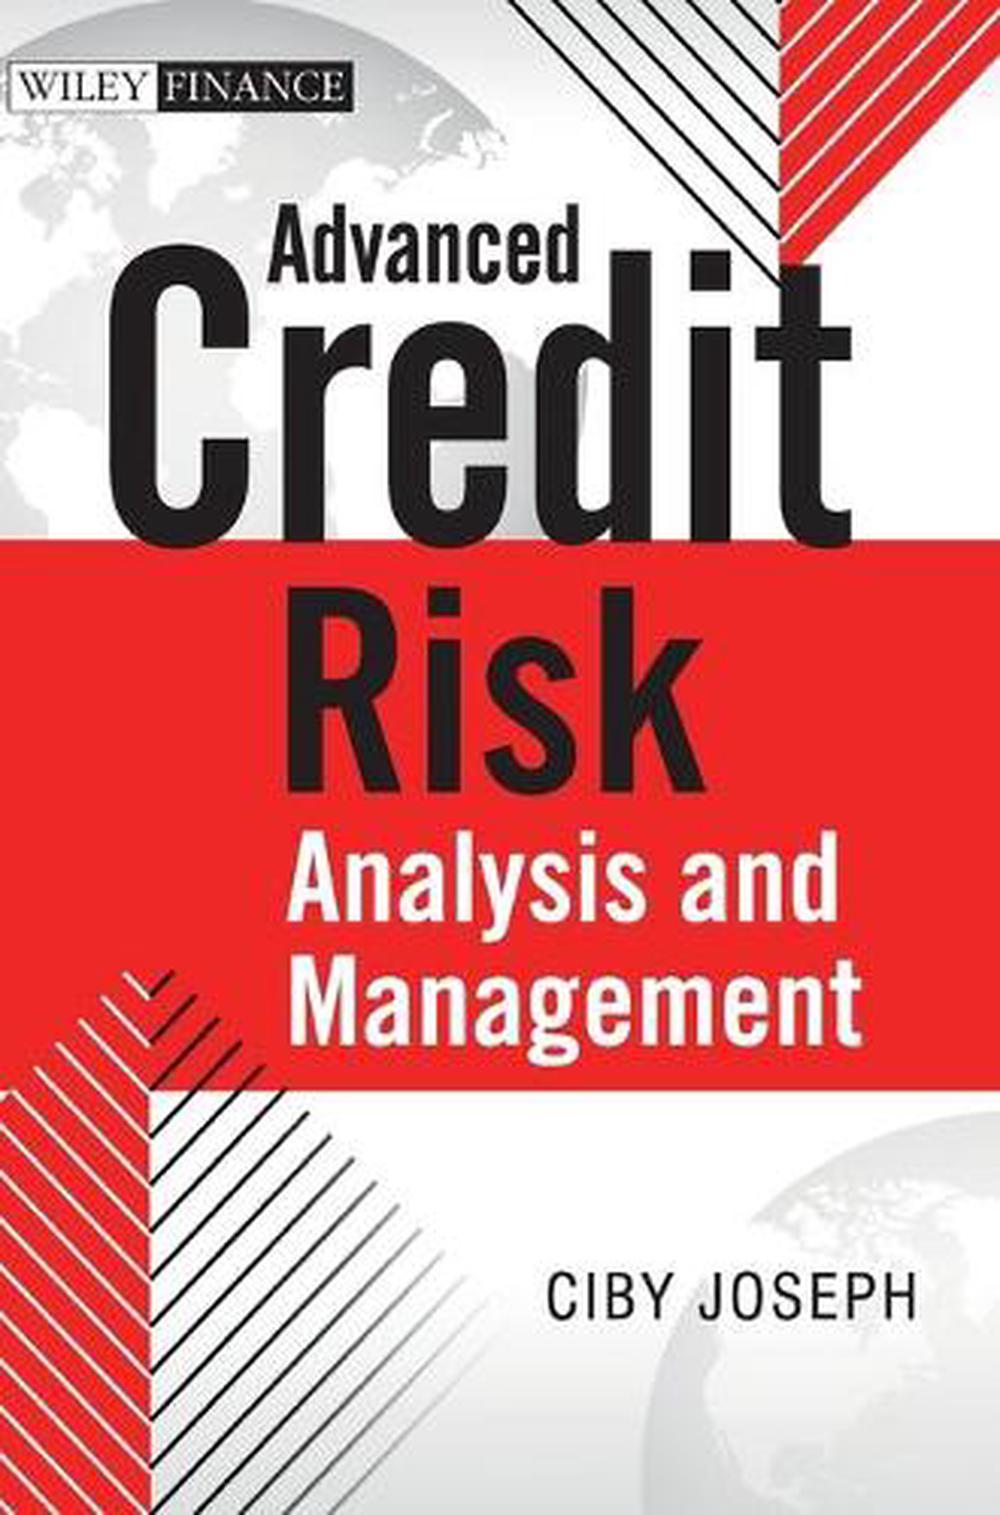 literature review of credit risk management